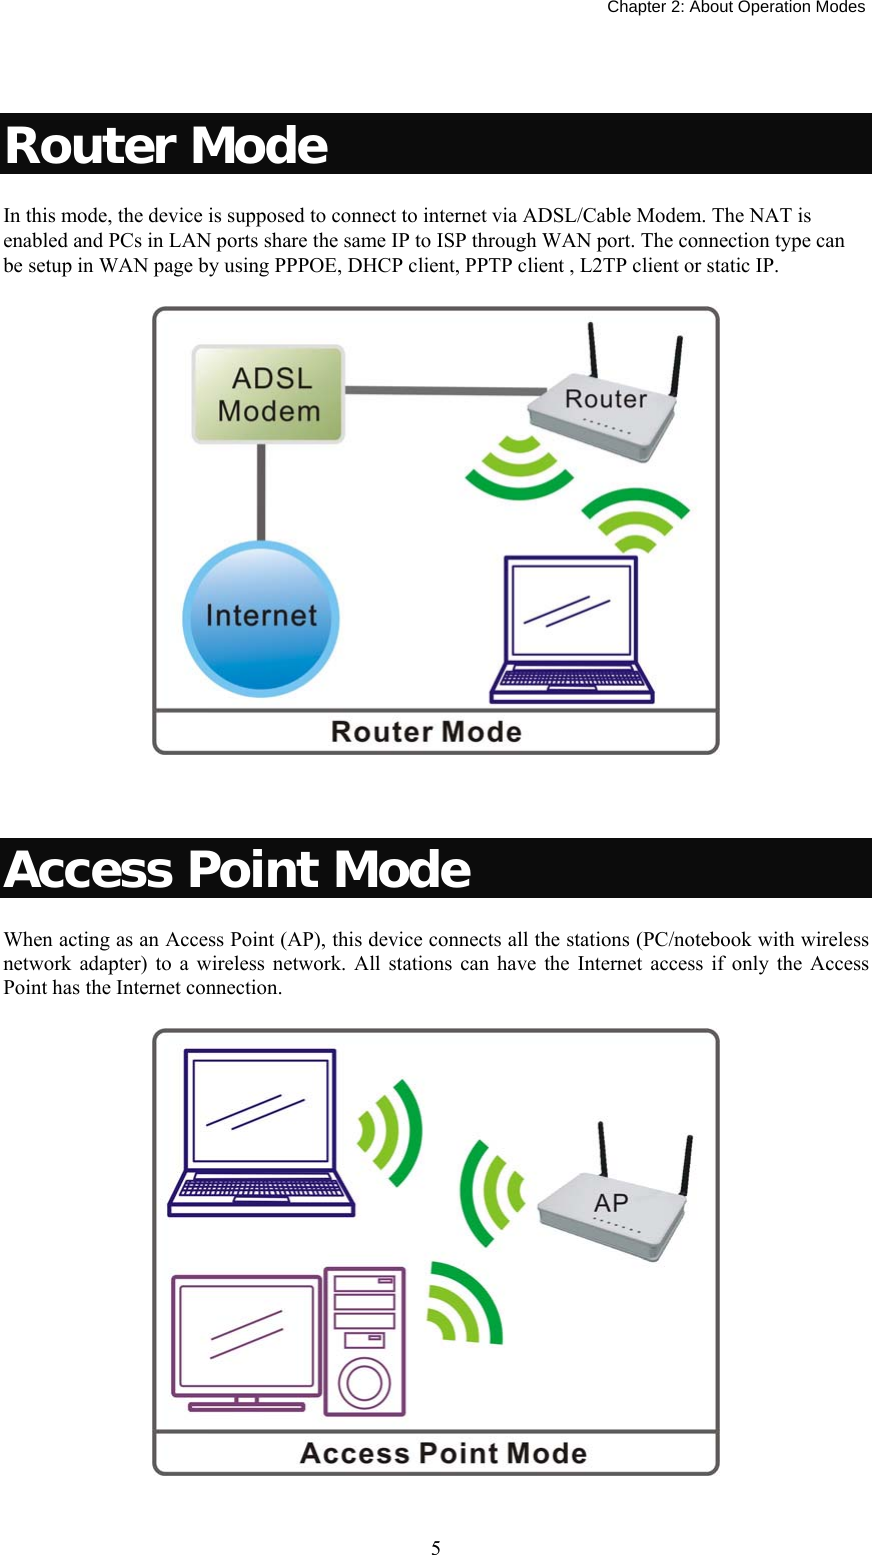   Chapter 2: About Operation Modes  5 Router Mode In this mode, the device is supposed to connect to internet via ADSL/Cable Modem. The NAT is enabled and PCs in LAN ports share the same IP to ISP through WAN port. The connection type can be setup in WAN page by using PPPOE, DHCP client, PPTP client , L2TP client or static IP.    Access Point Mode When acting as an Access Point (AP), this device connects all the stations (PC/notebook with wireless network adapter) to a wireless network. All stations can have the Internet access if only the Access Point has the Internet connection.  